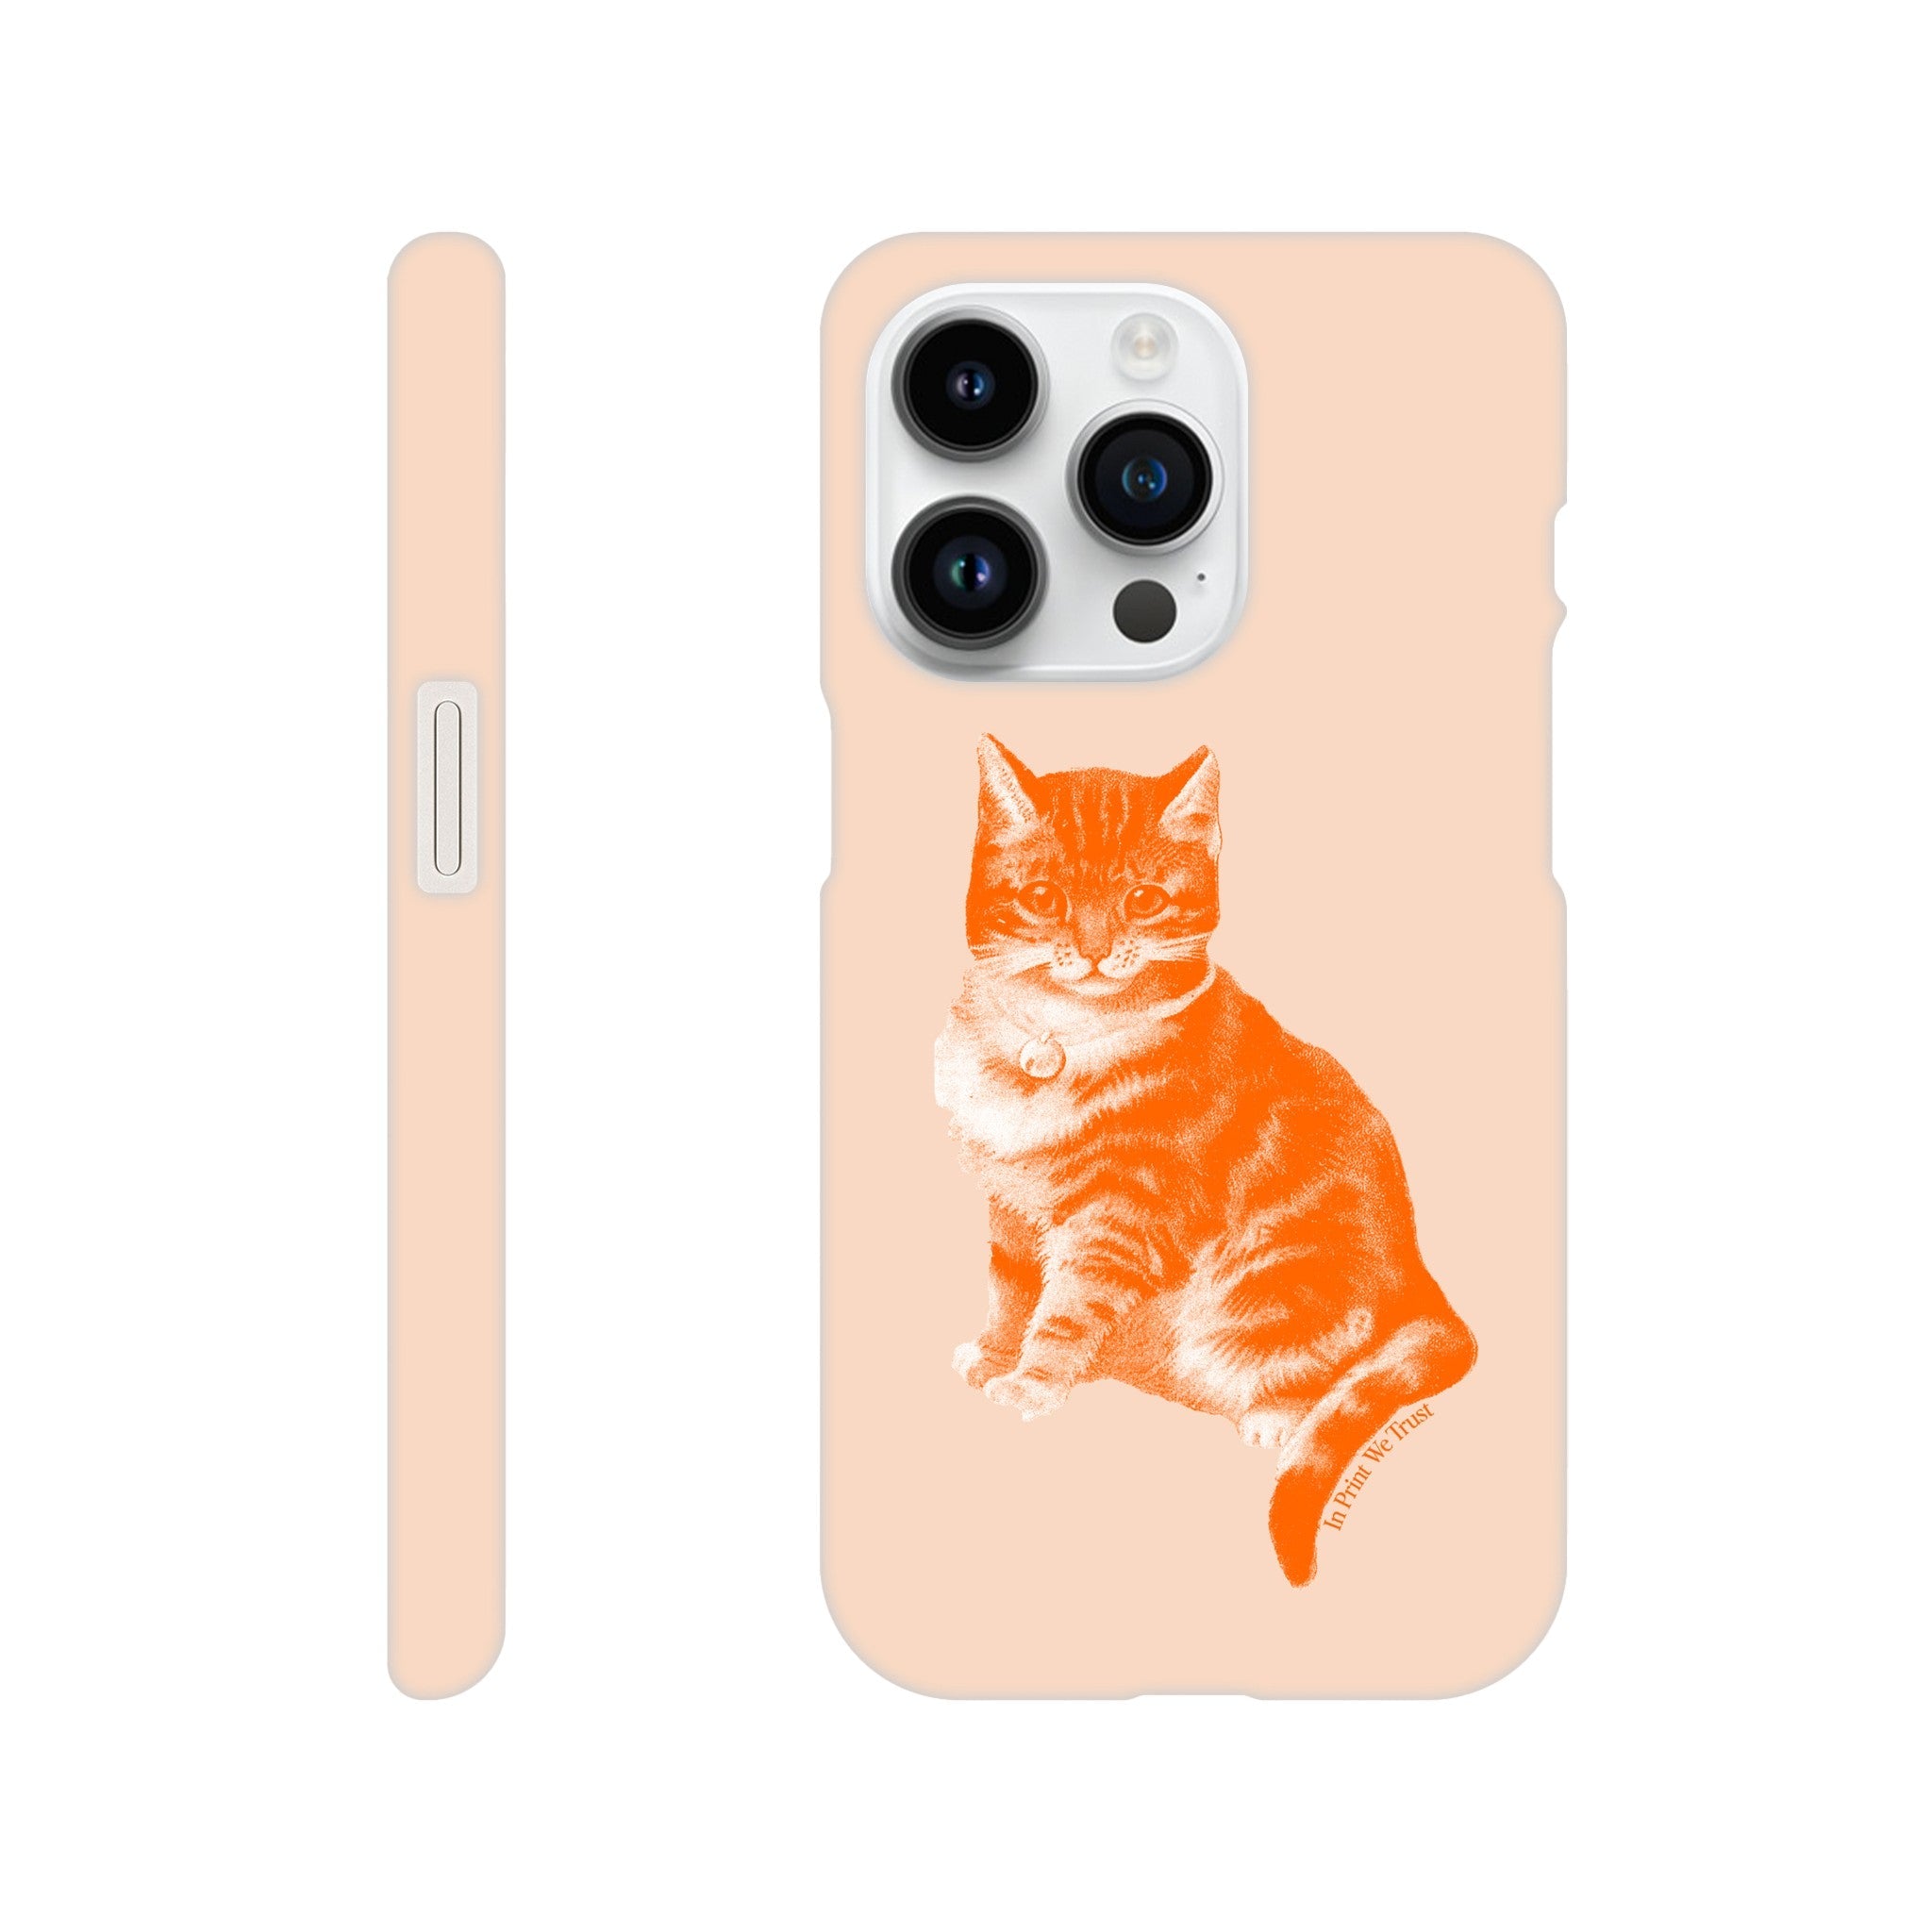 'Kitty' phone case - In Print We Trust